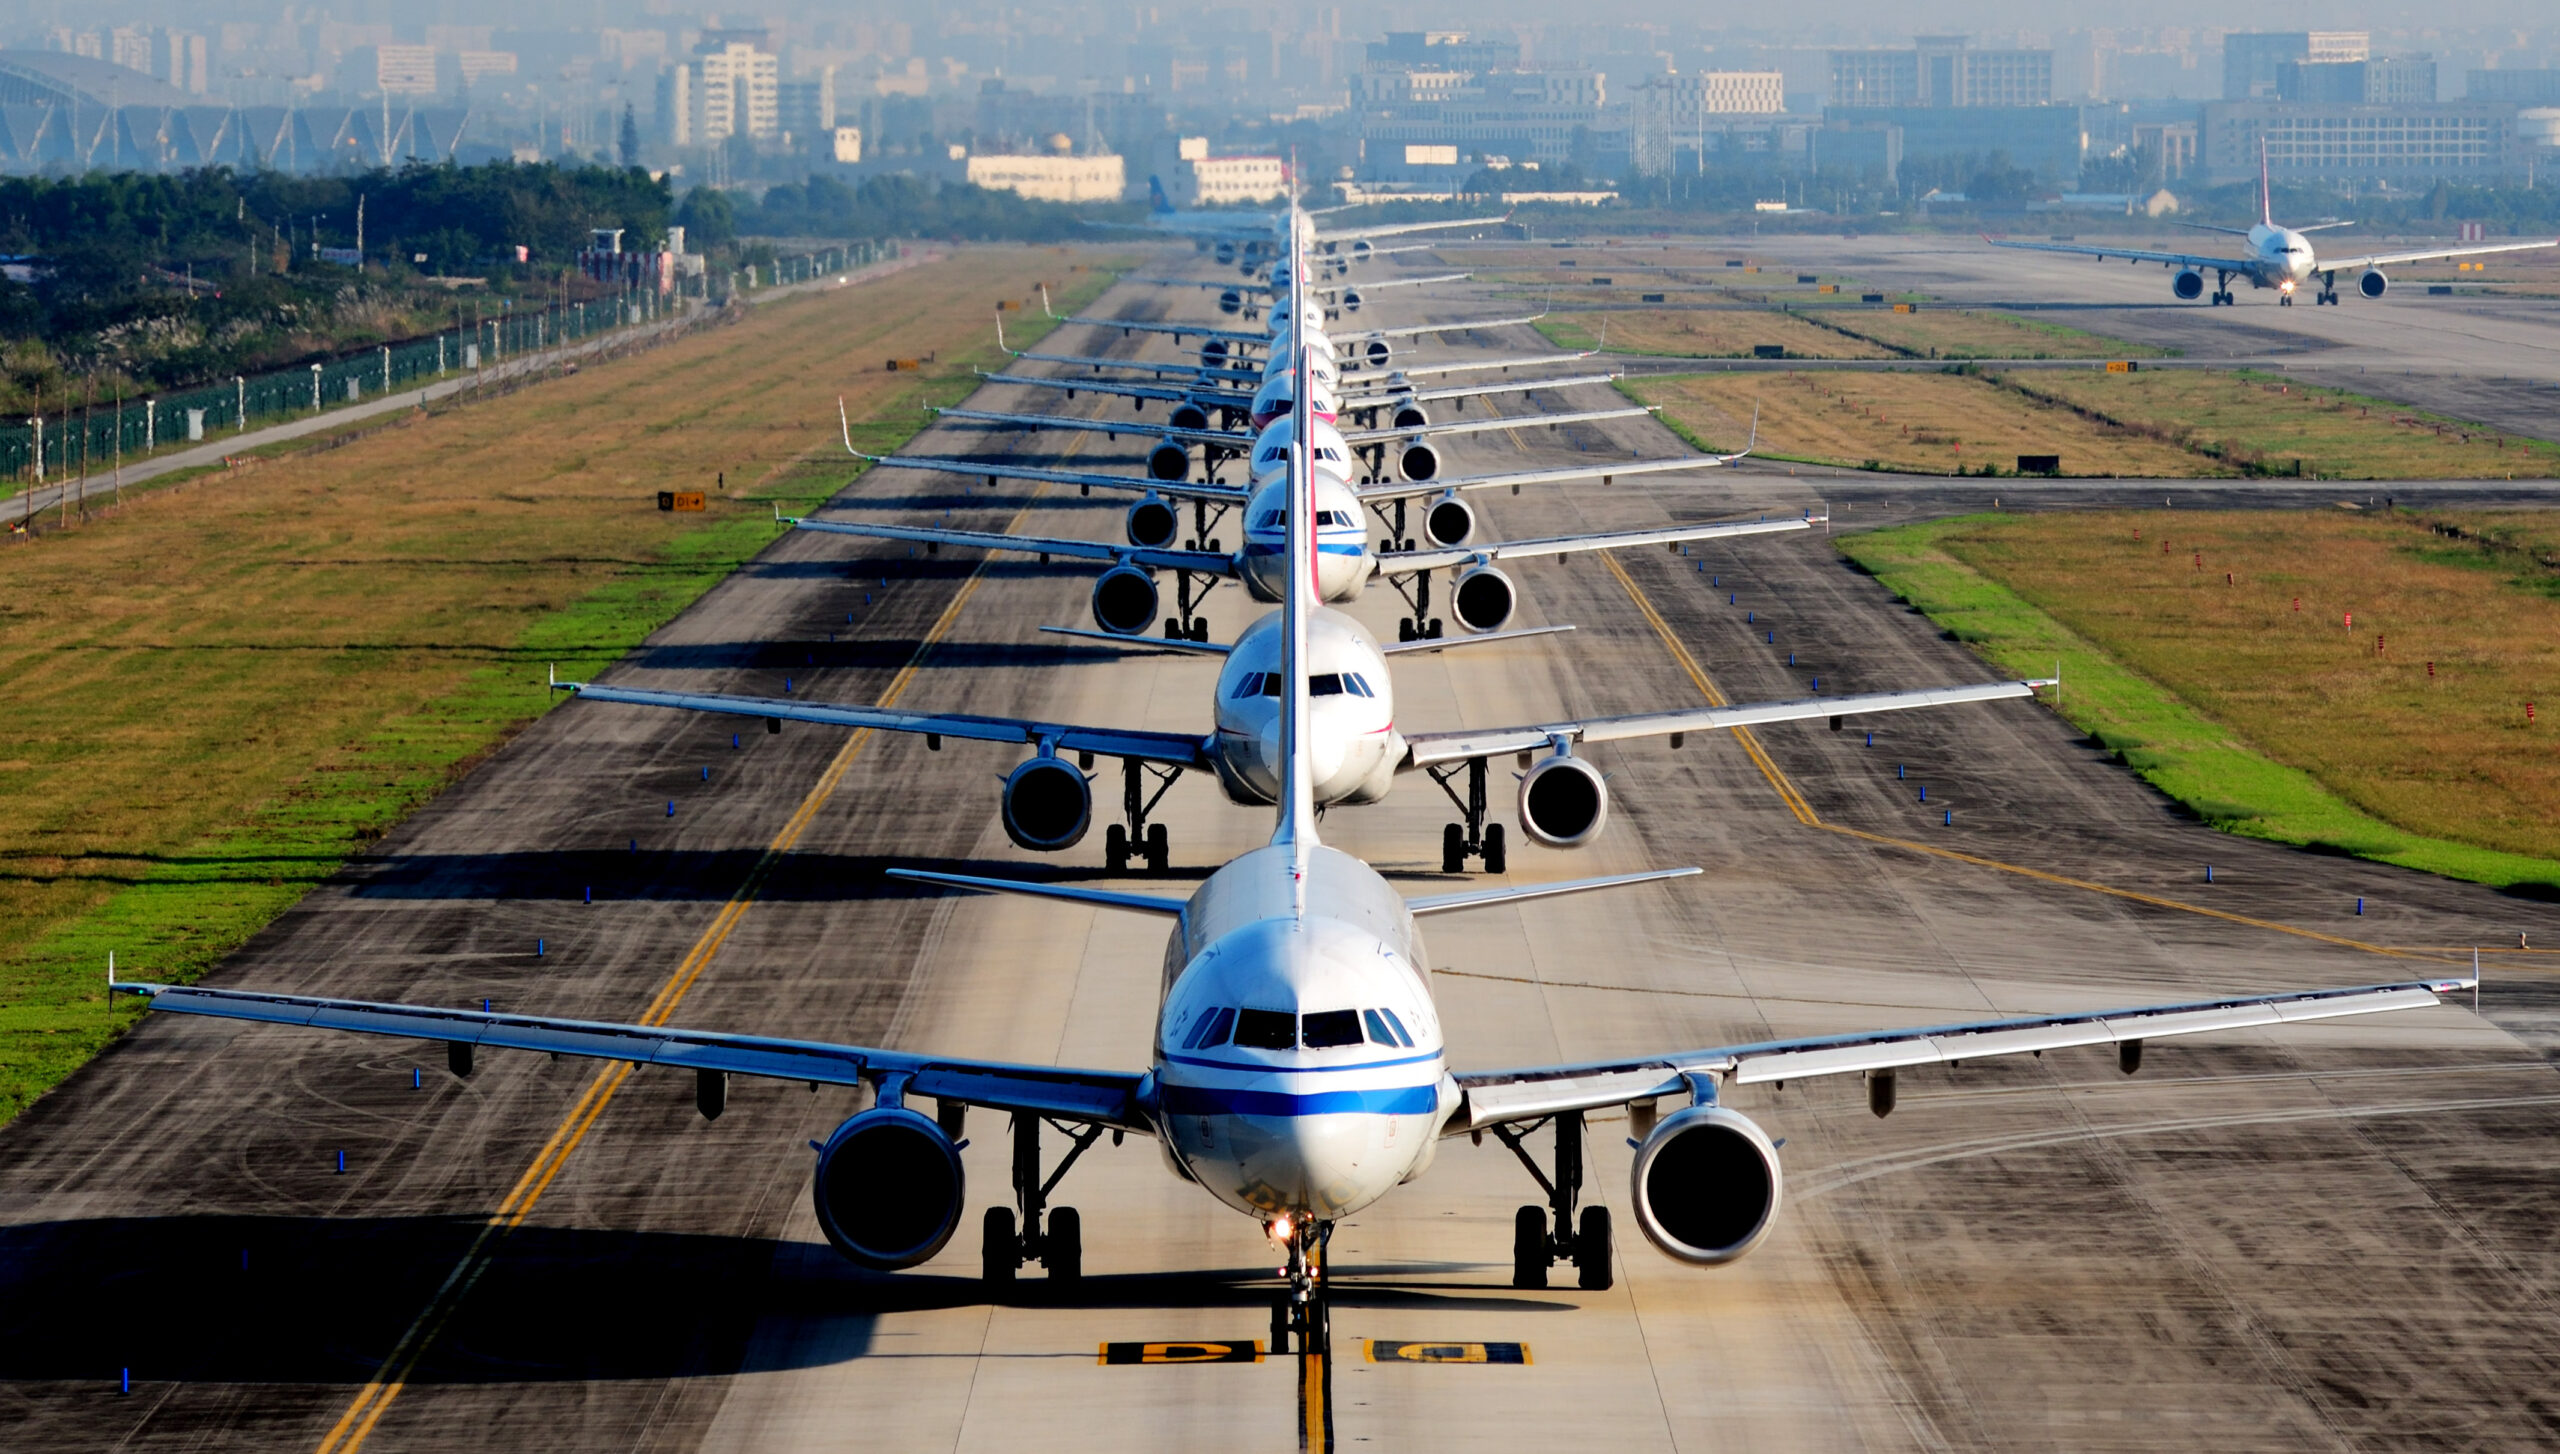 Africa's aviation industry growth